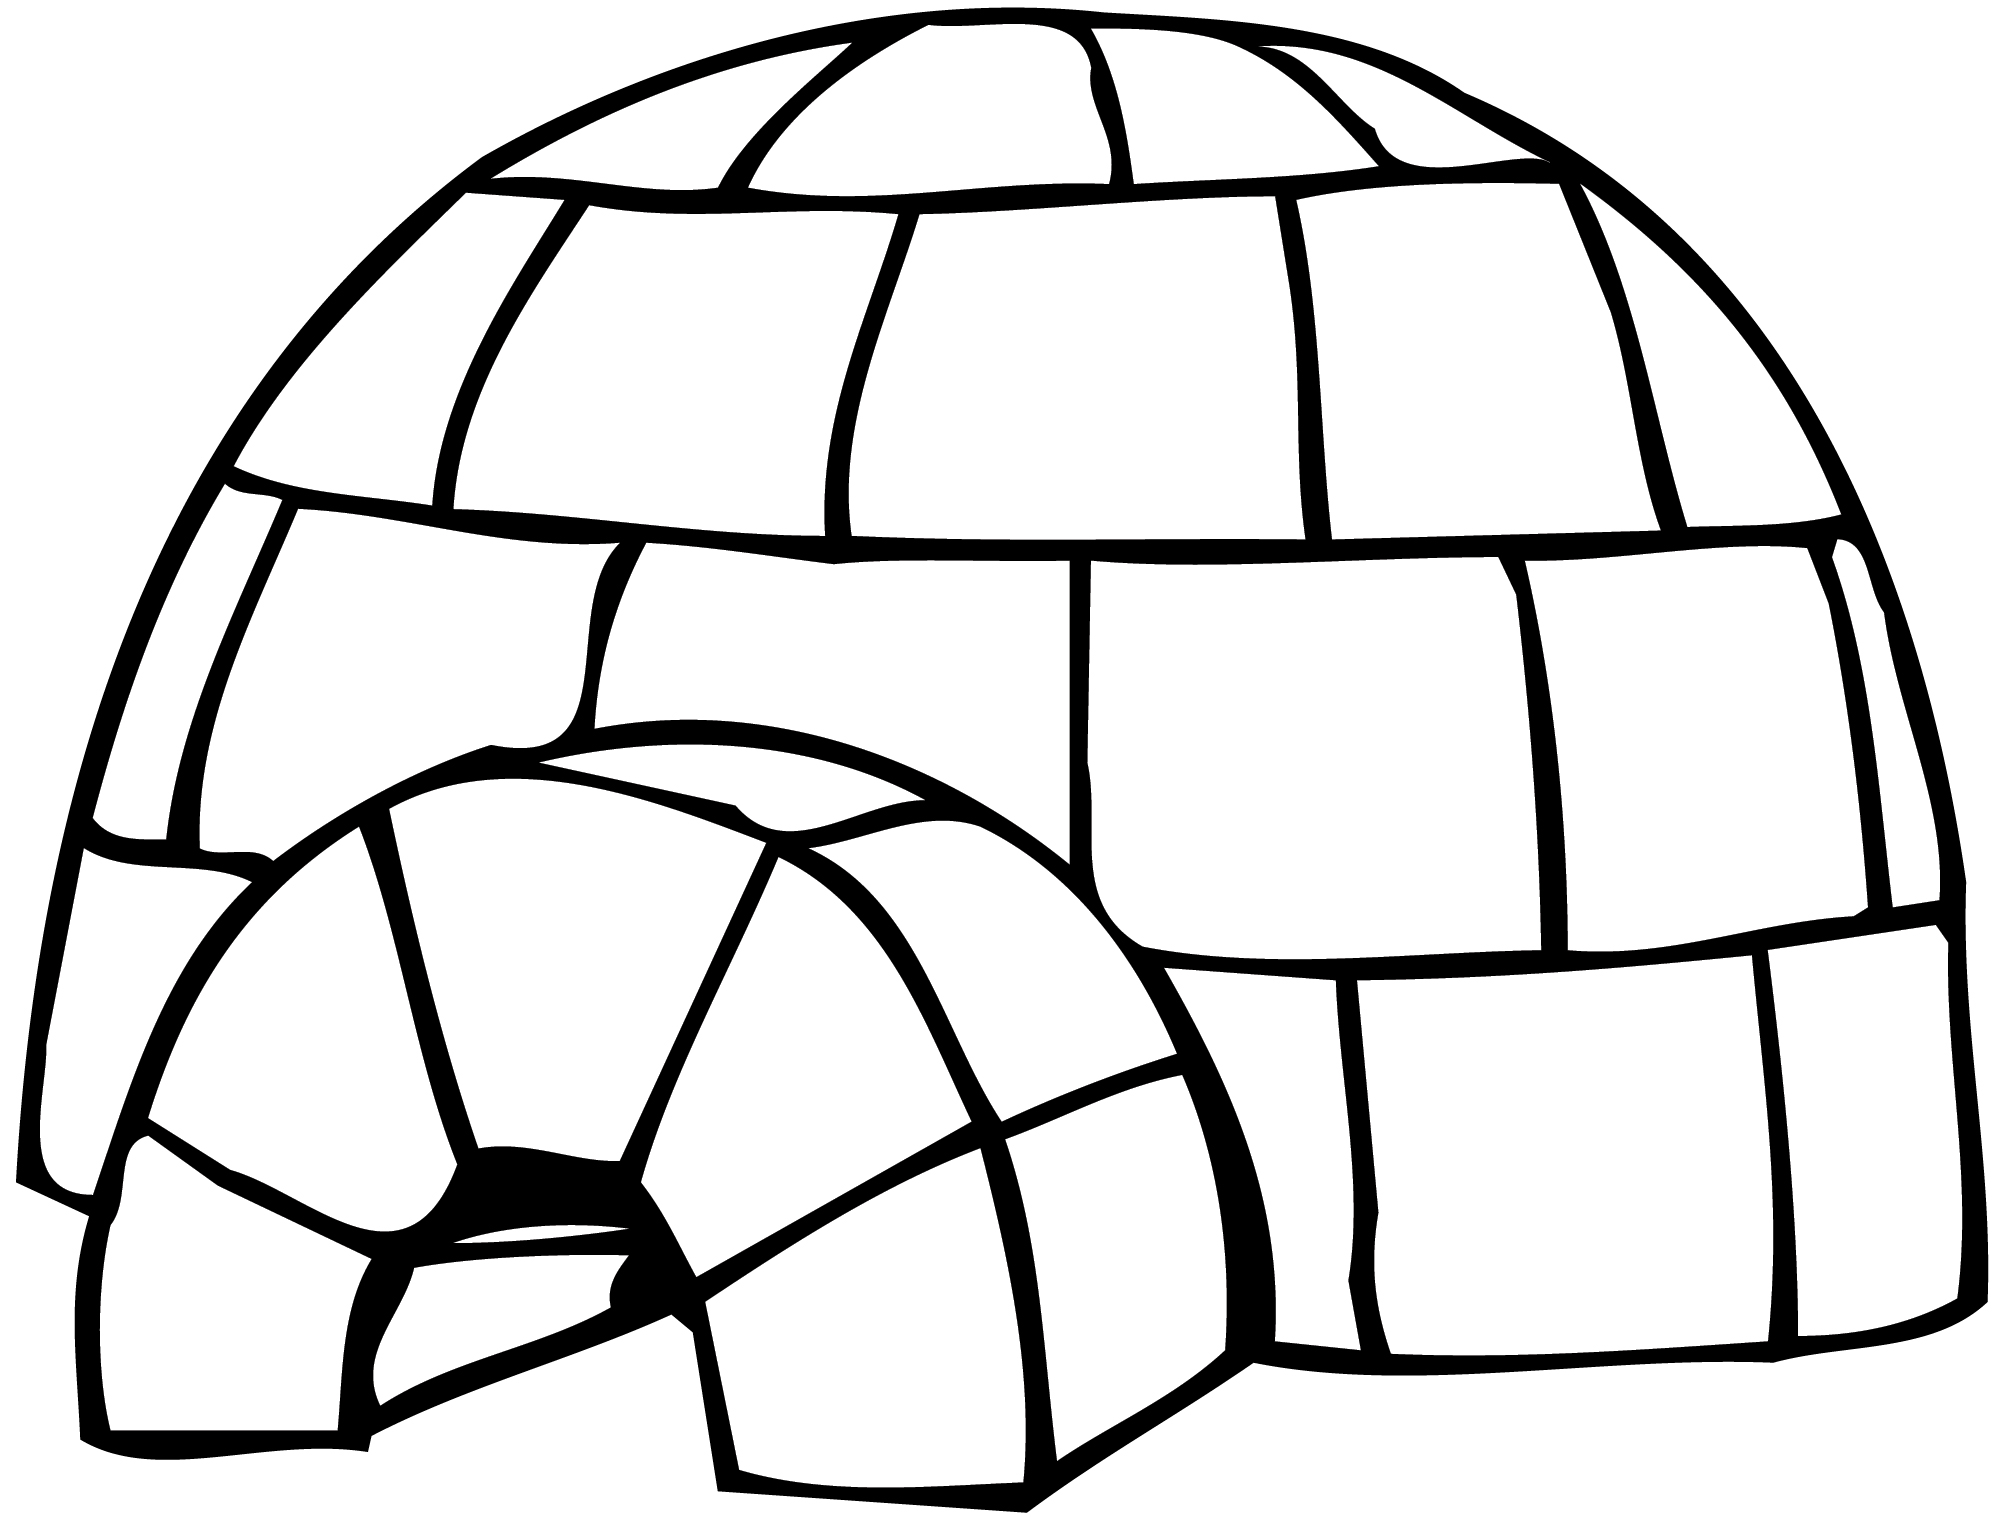 Igloo Coloring Pages Online Igloo Coloring Pages Igloo Vector Igloo